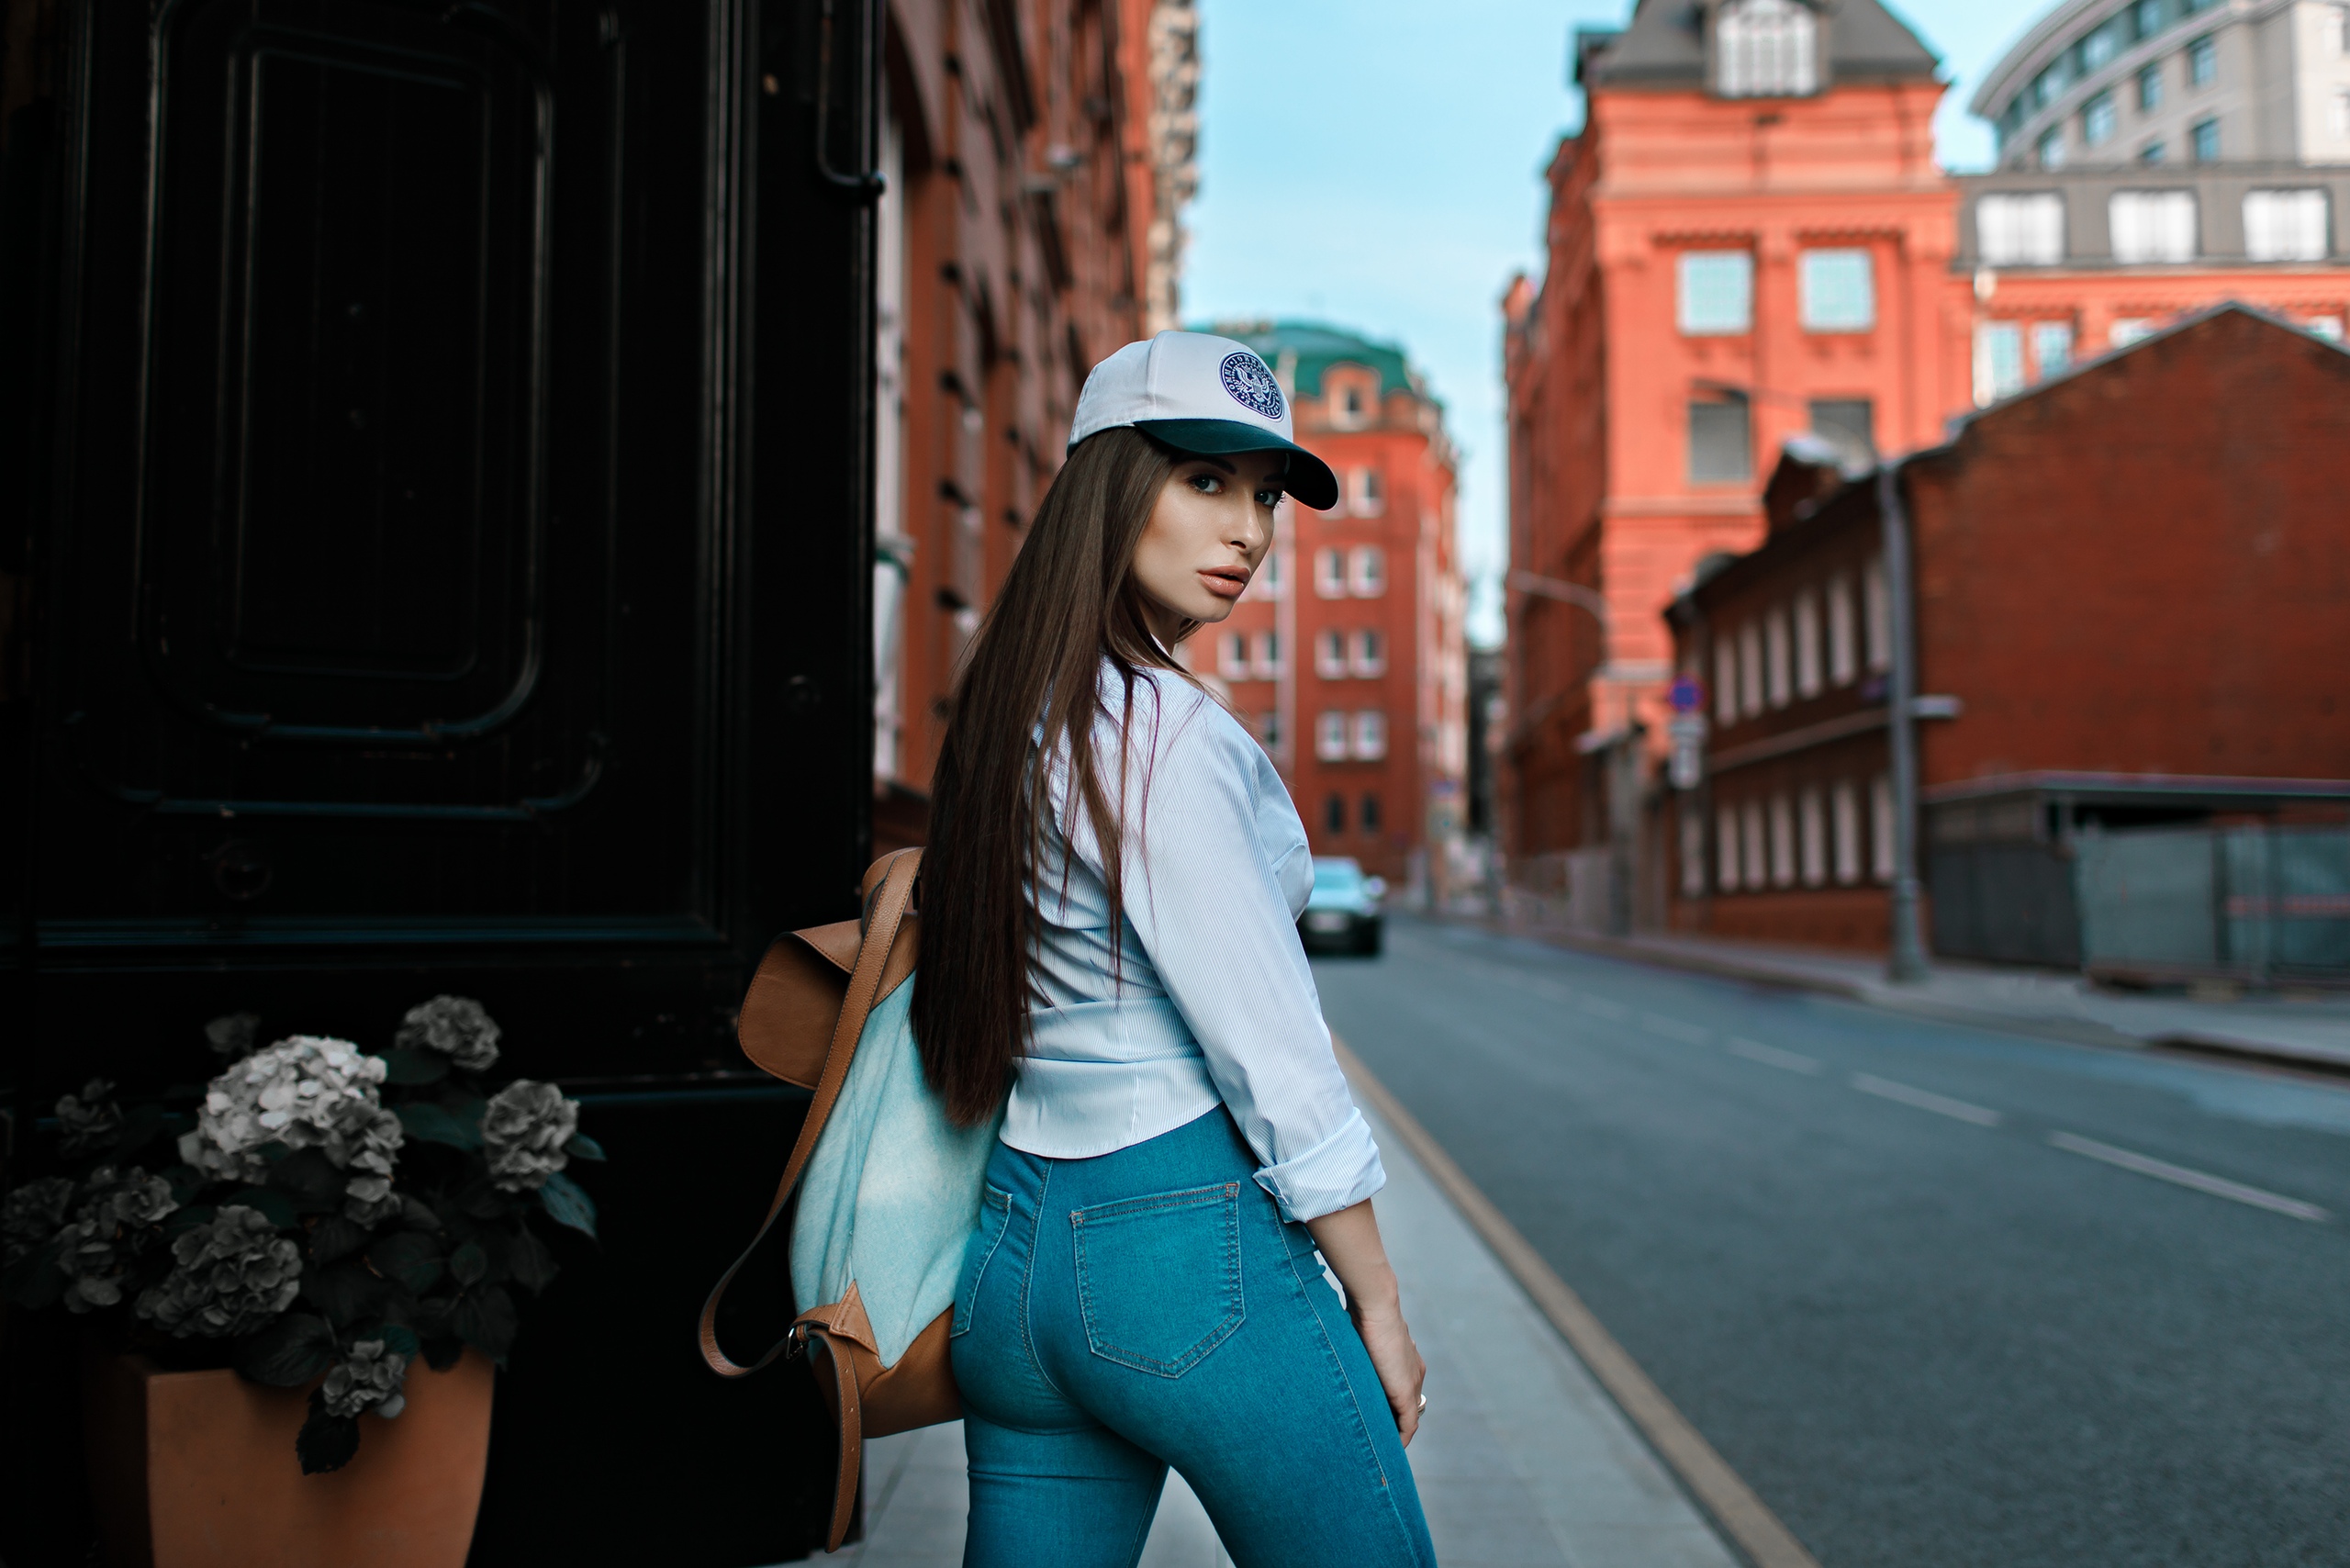 Free photo A girl in jeans and a baseball cap walks around town